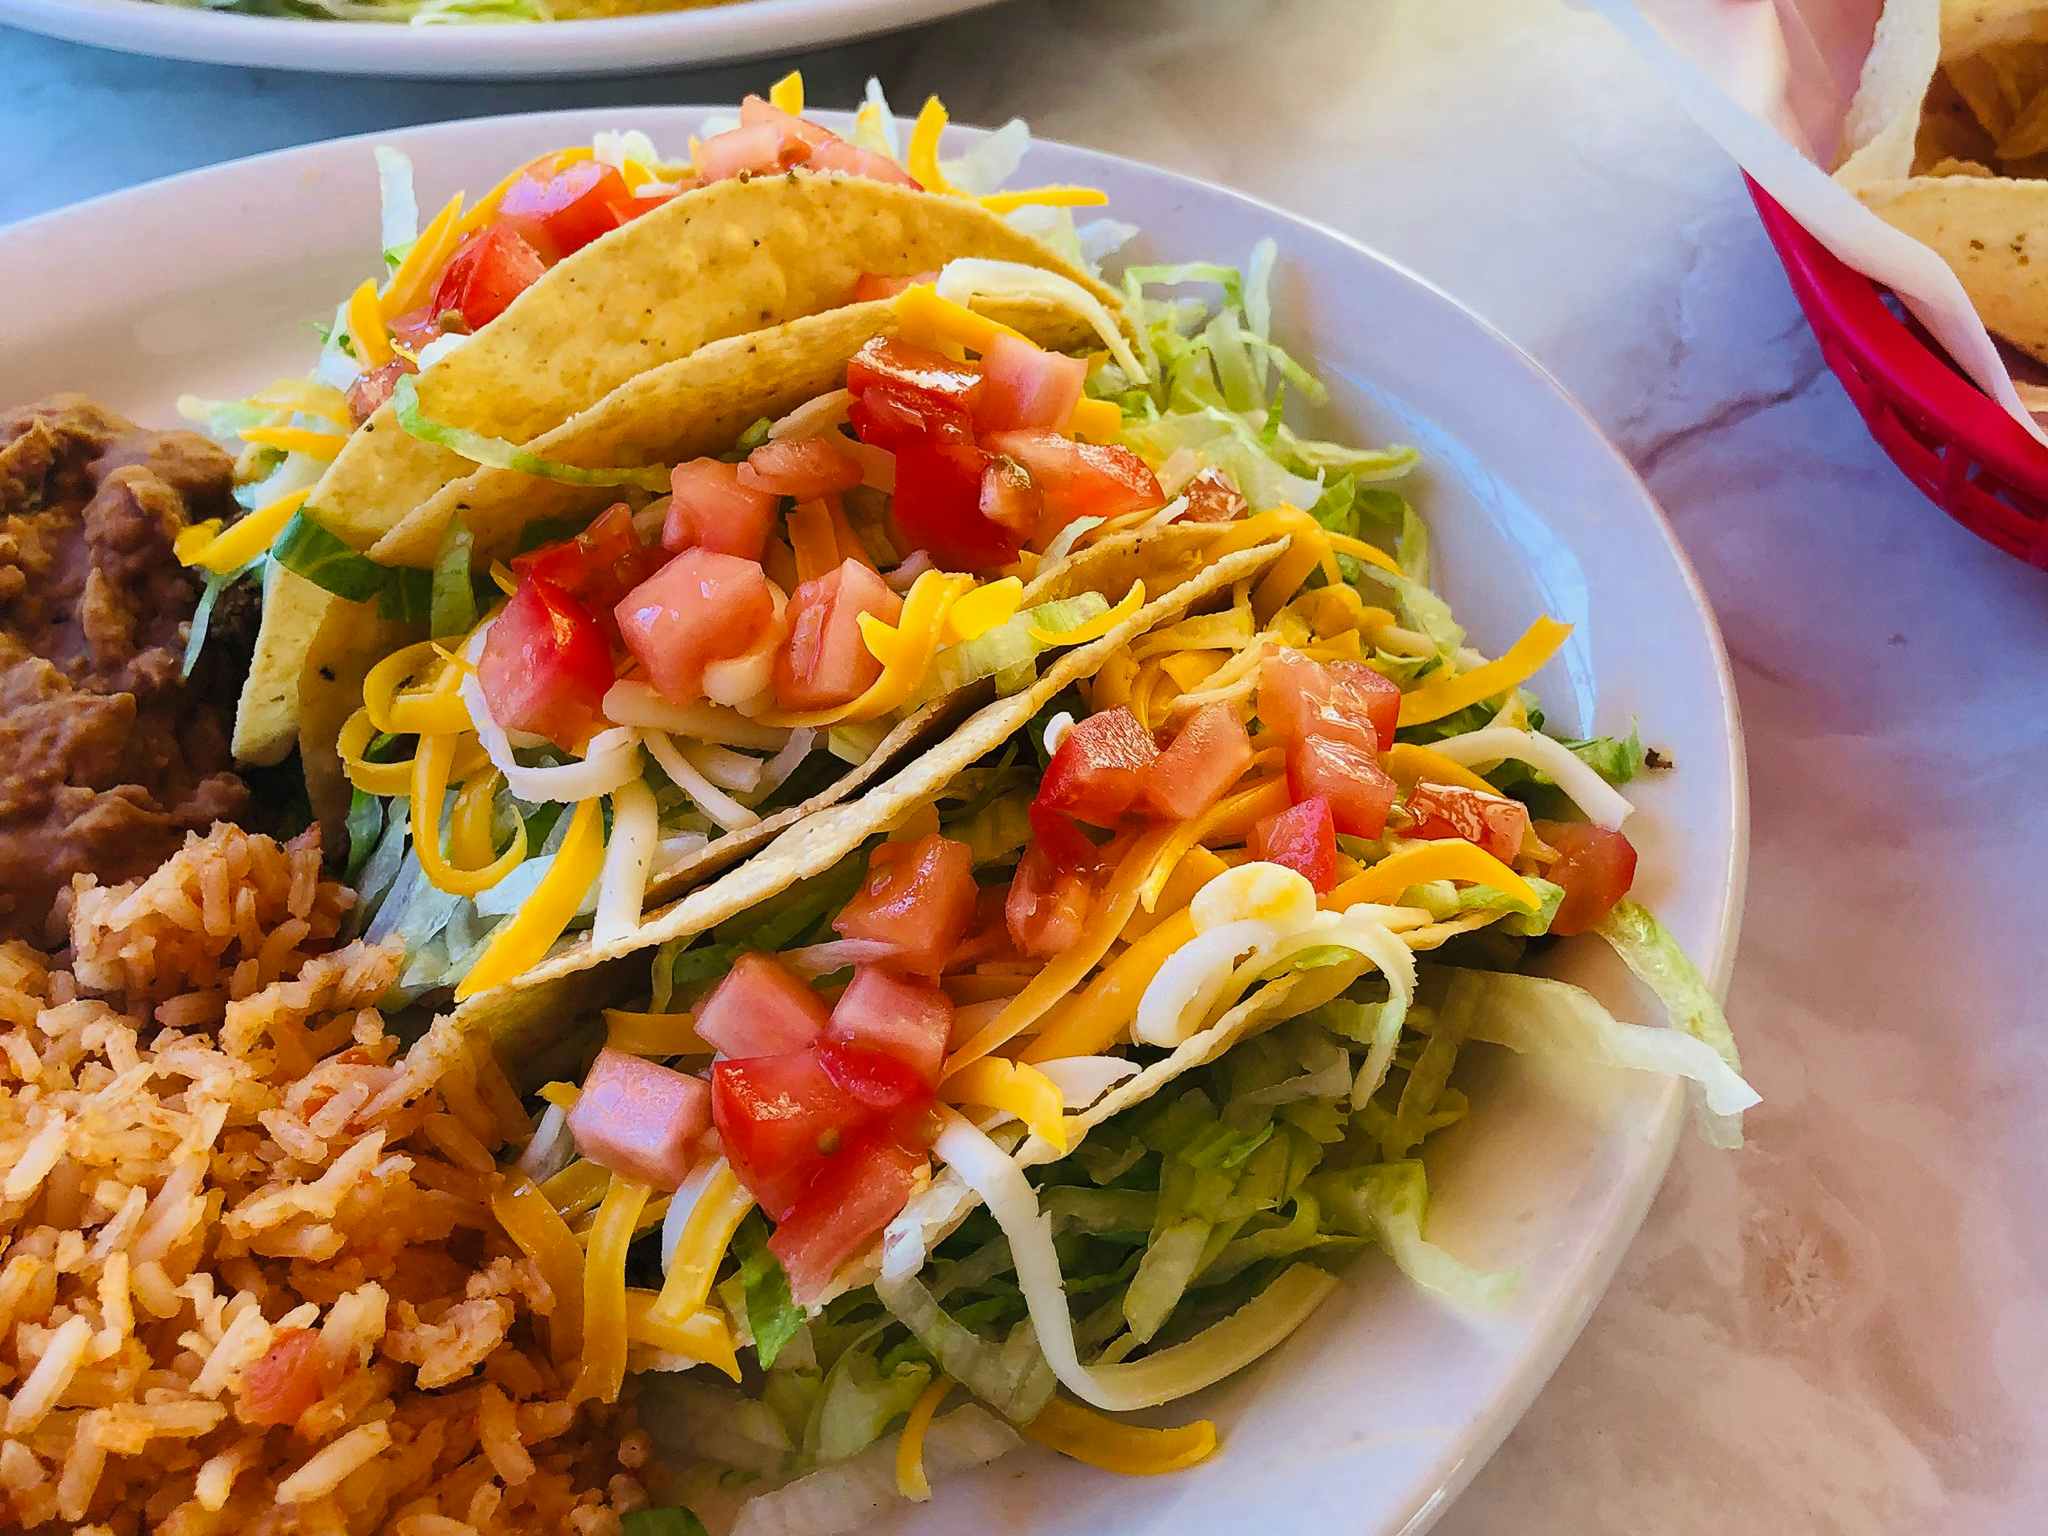 Tacos from Chuy's on a plate.